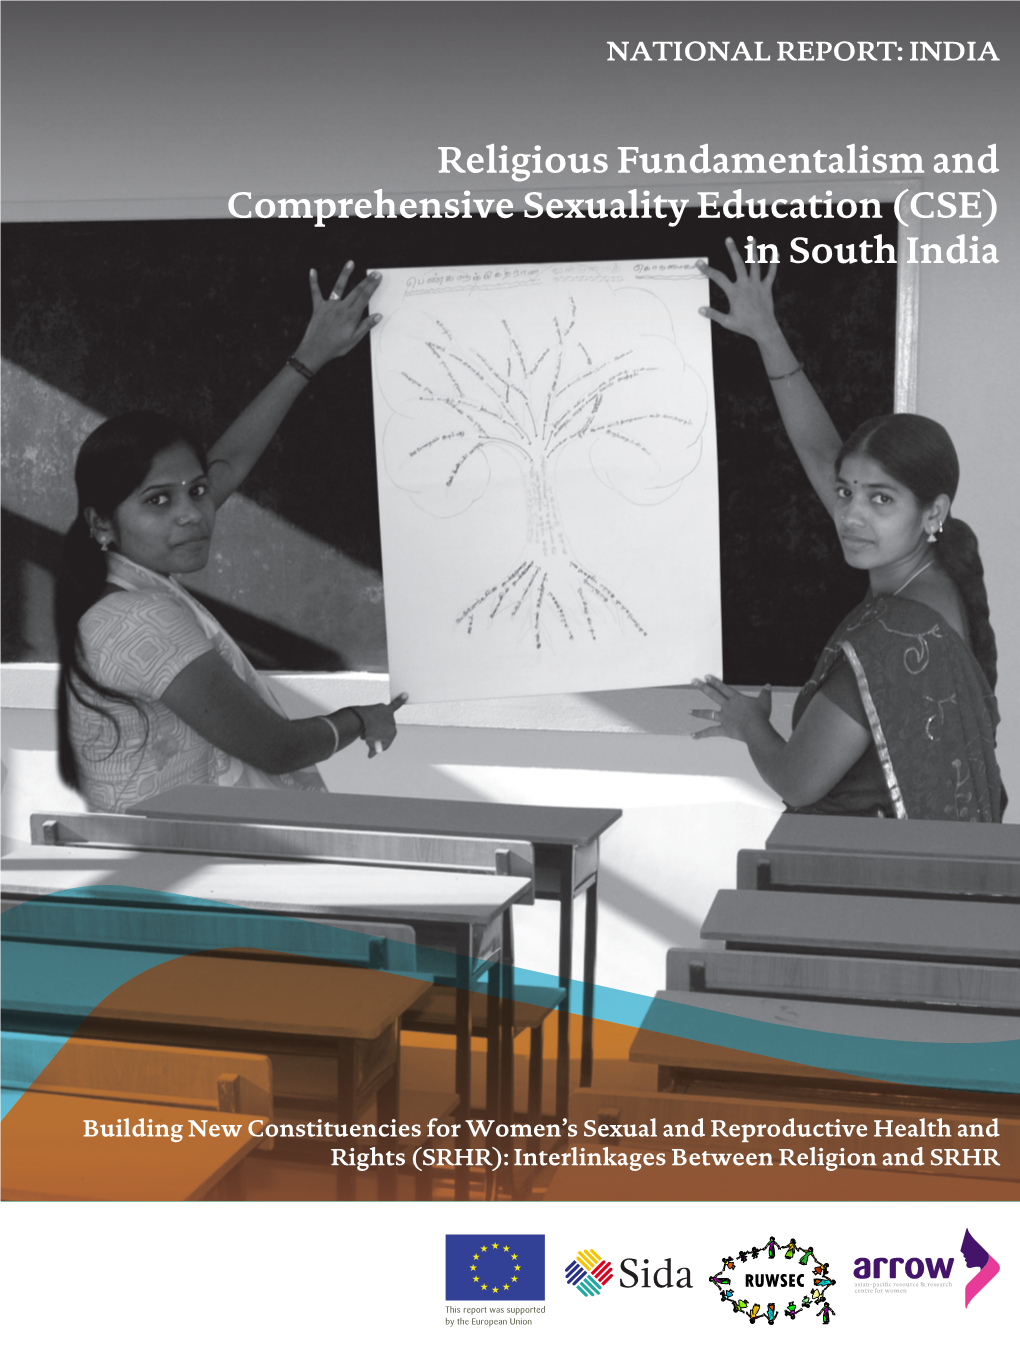 Religious Fundamentalism and Comprehensive Sexuality Education (CSE) in South India